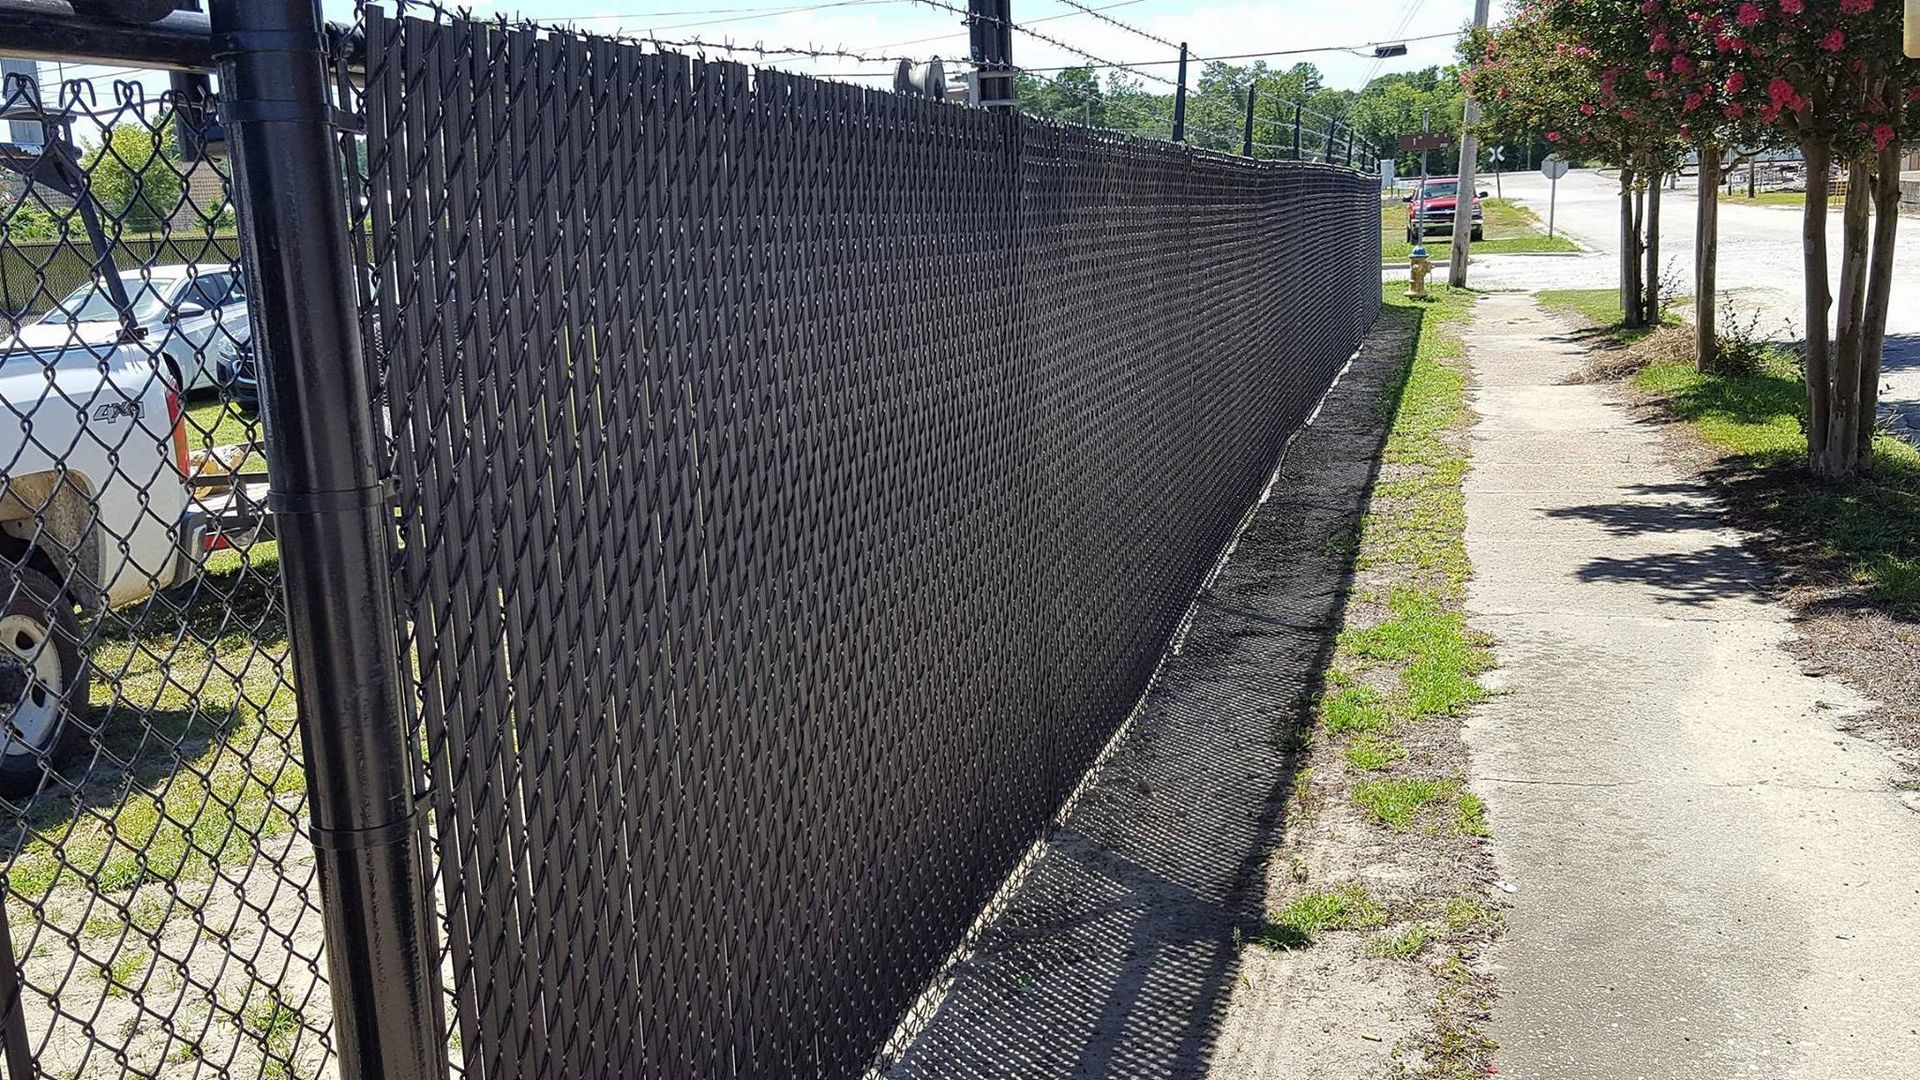 A chain link fence along a sidewalk next to a road.